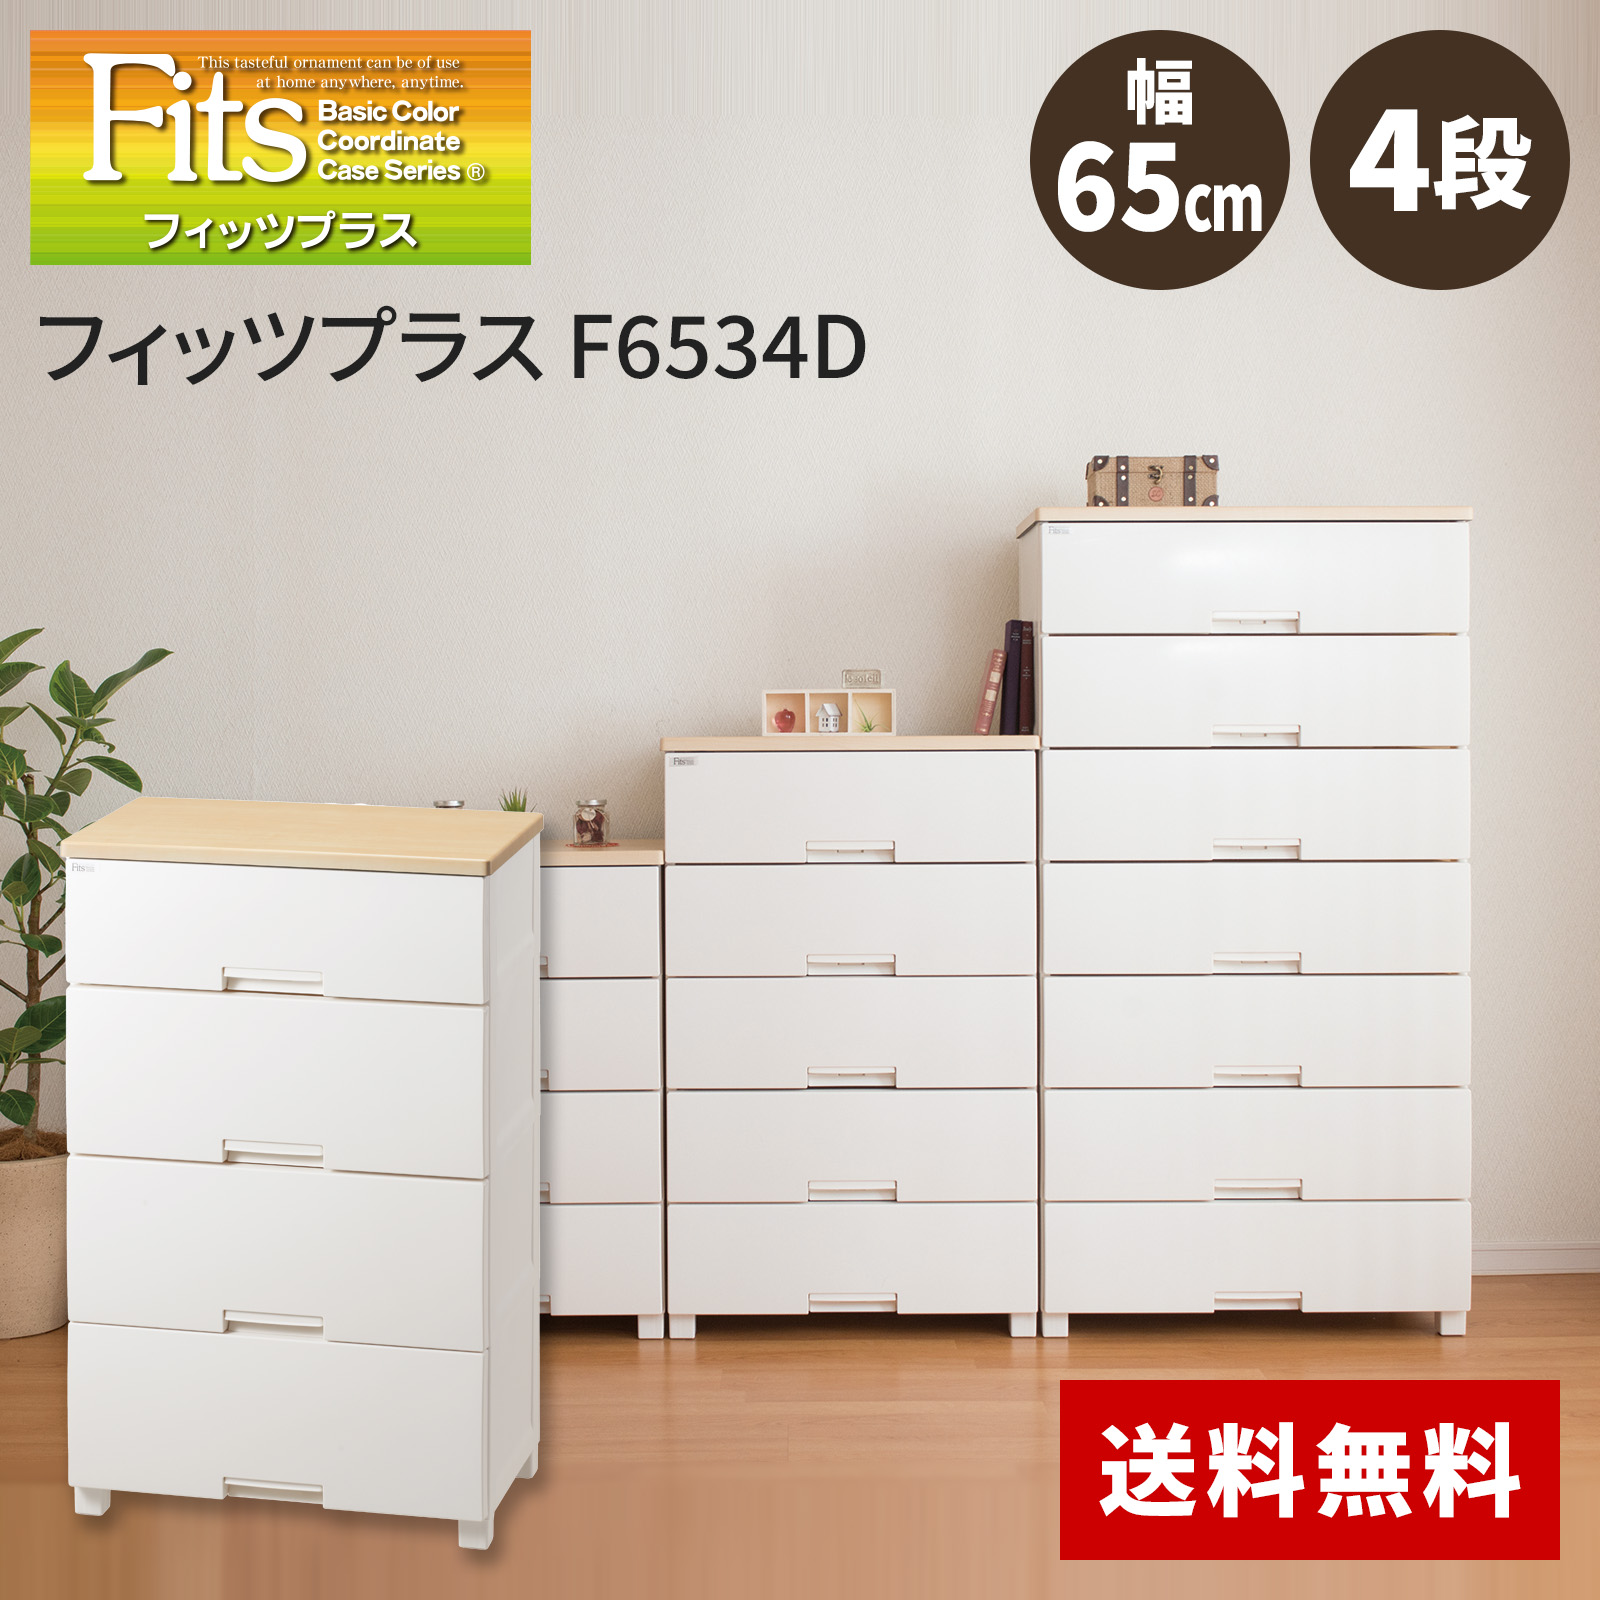 Fits フィッツプラス 4段 メープル 2台セット camping.com